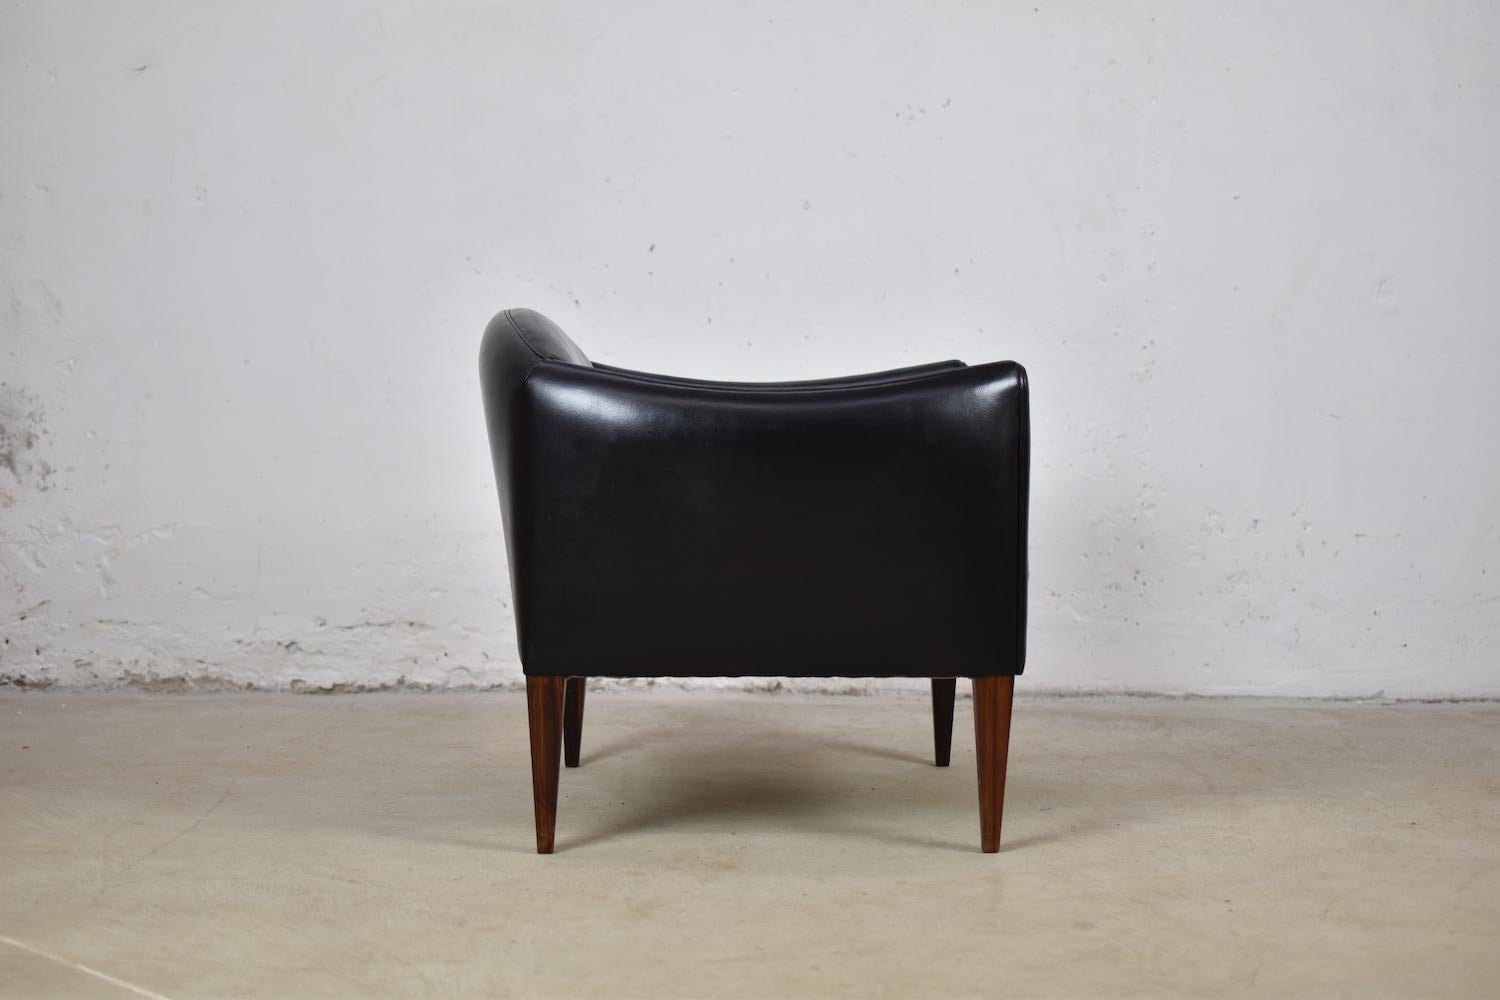 Lovely V12 easy chair by Illum Wikkelsø for Søren Willadsen Møbelfabrik, Denmark, 1960s. This elegant side chair features a black leather upholstery and marvelous shaped rosewood legs. Very good original condition.